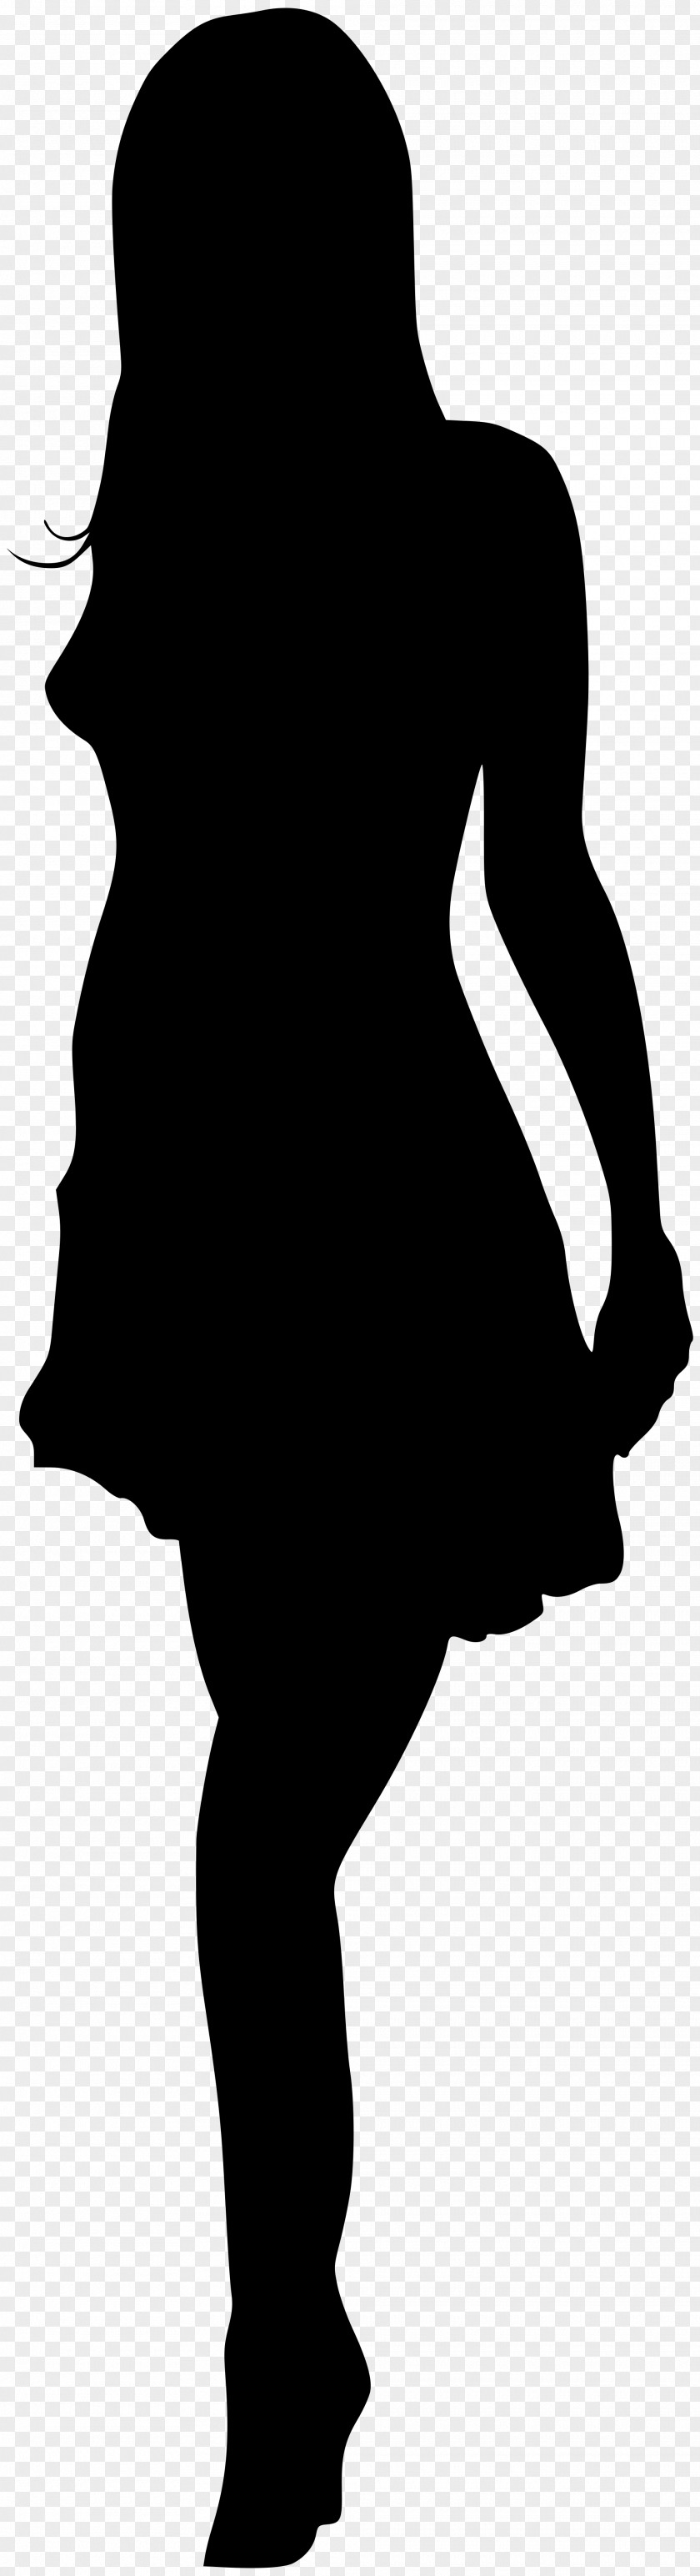 Female Silhouette Woman Wikimedia Commons PNG